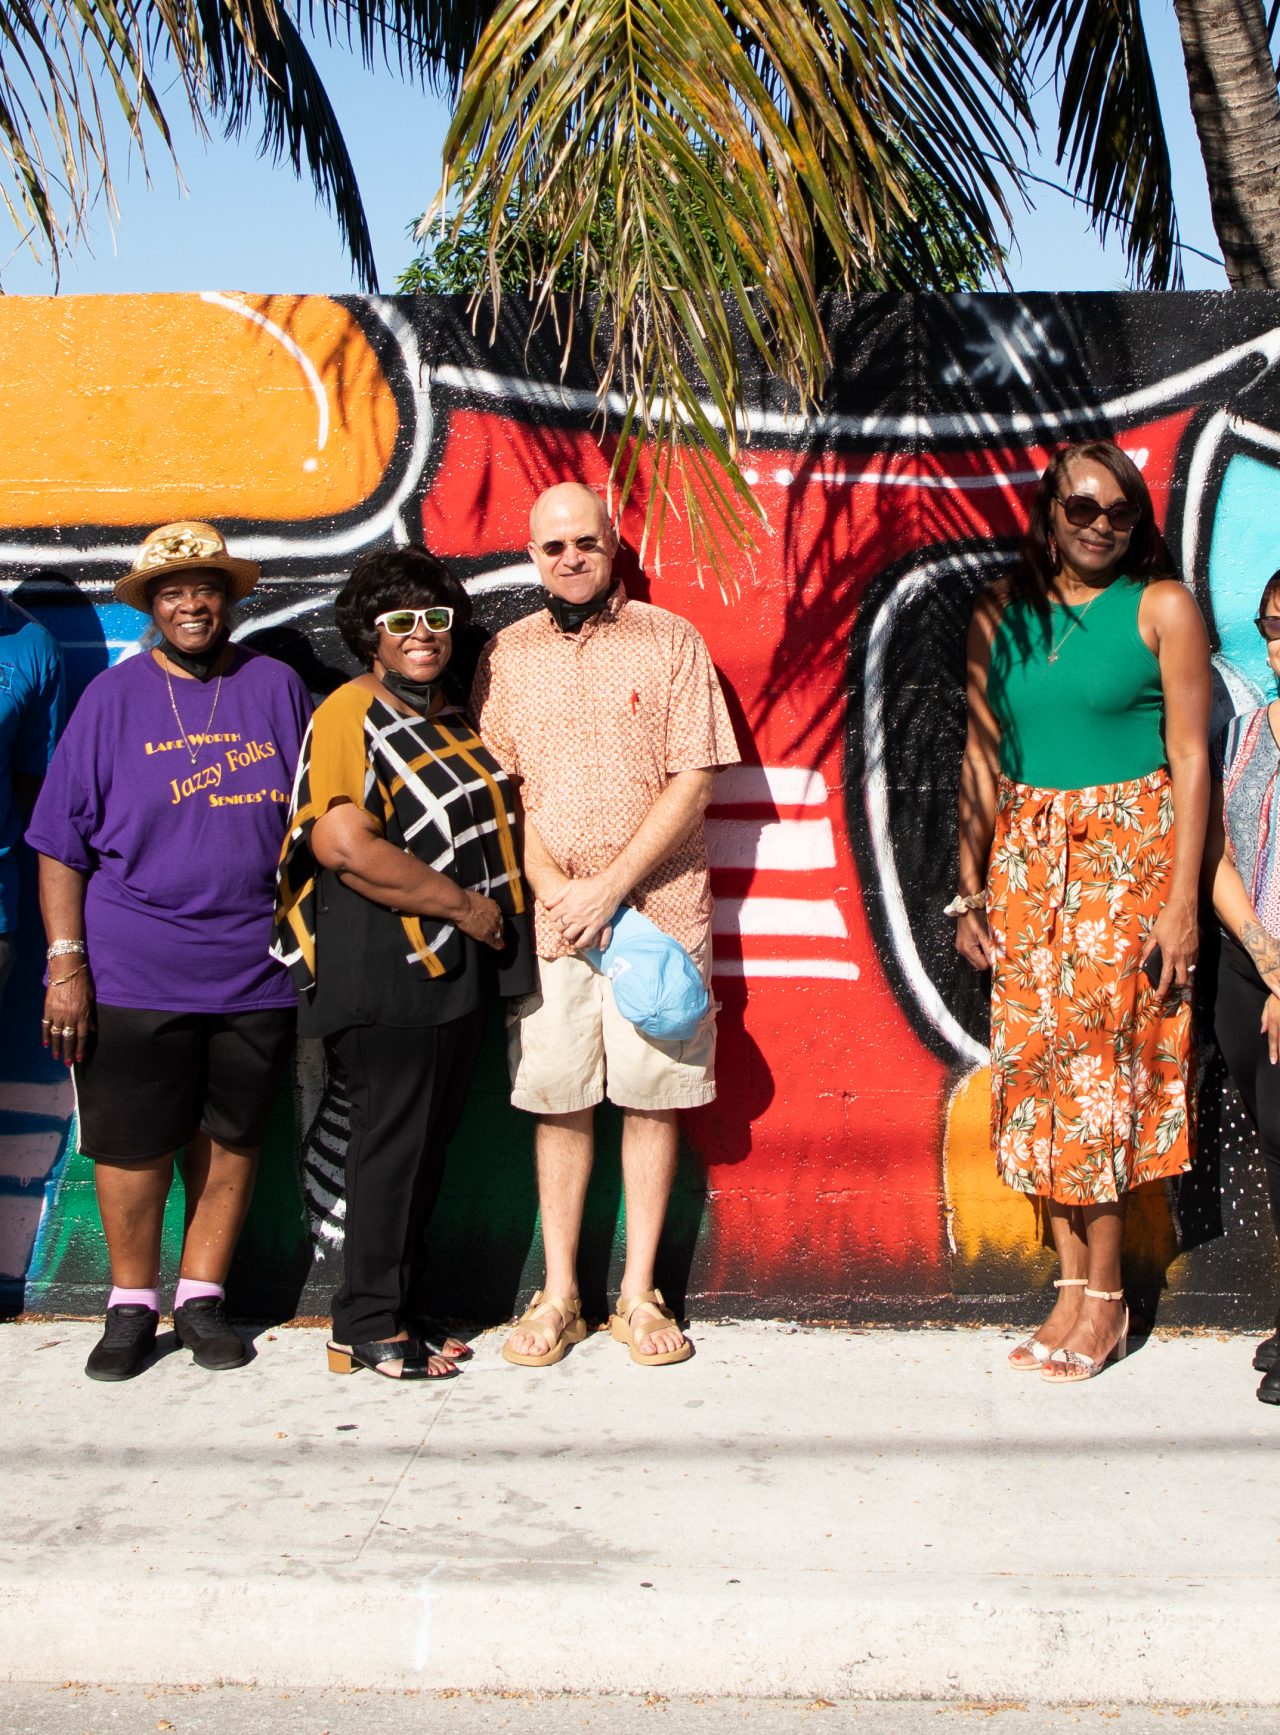 Pictured right to left as follows : Sandra Lula Gover, Roselyn Davis (brown shirt), Sidney Rodriguez, Carmelle Marcelin-Chapman (green top), Samuel Goodstein (bald man), Carla Blockson (sunglasses with black, white and brown top), Retha Lowe (purple shirt), Patrick Livingston (blue shirt) and Adella Bell (very left of frame) at the Unity Wall. A wall that formerly served as a symbol of division is now a beacon of light for inclusion and diversity in Lake Worth Beach. The wall served as an unofficial border between the residents of the "Osborne Colored Addition" and their white neighbors. The city's zoning code required Black residents to live in the Osborne subdivision until 1969. 67 South Florida professional artists and residents helped paint the 1,175 foot long wall with art murals that represent the past, present, and future of the community.